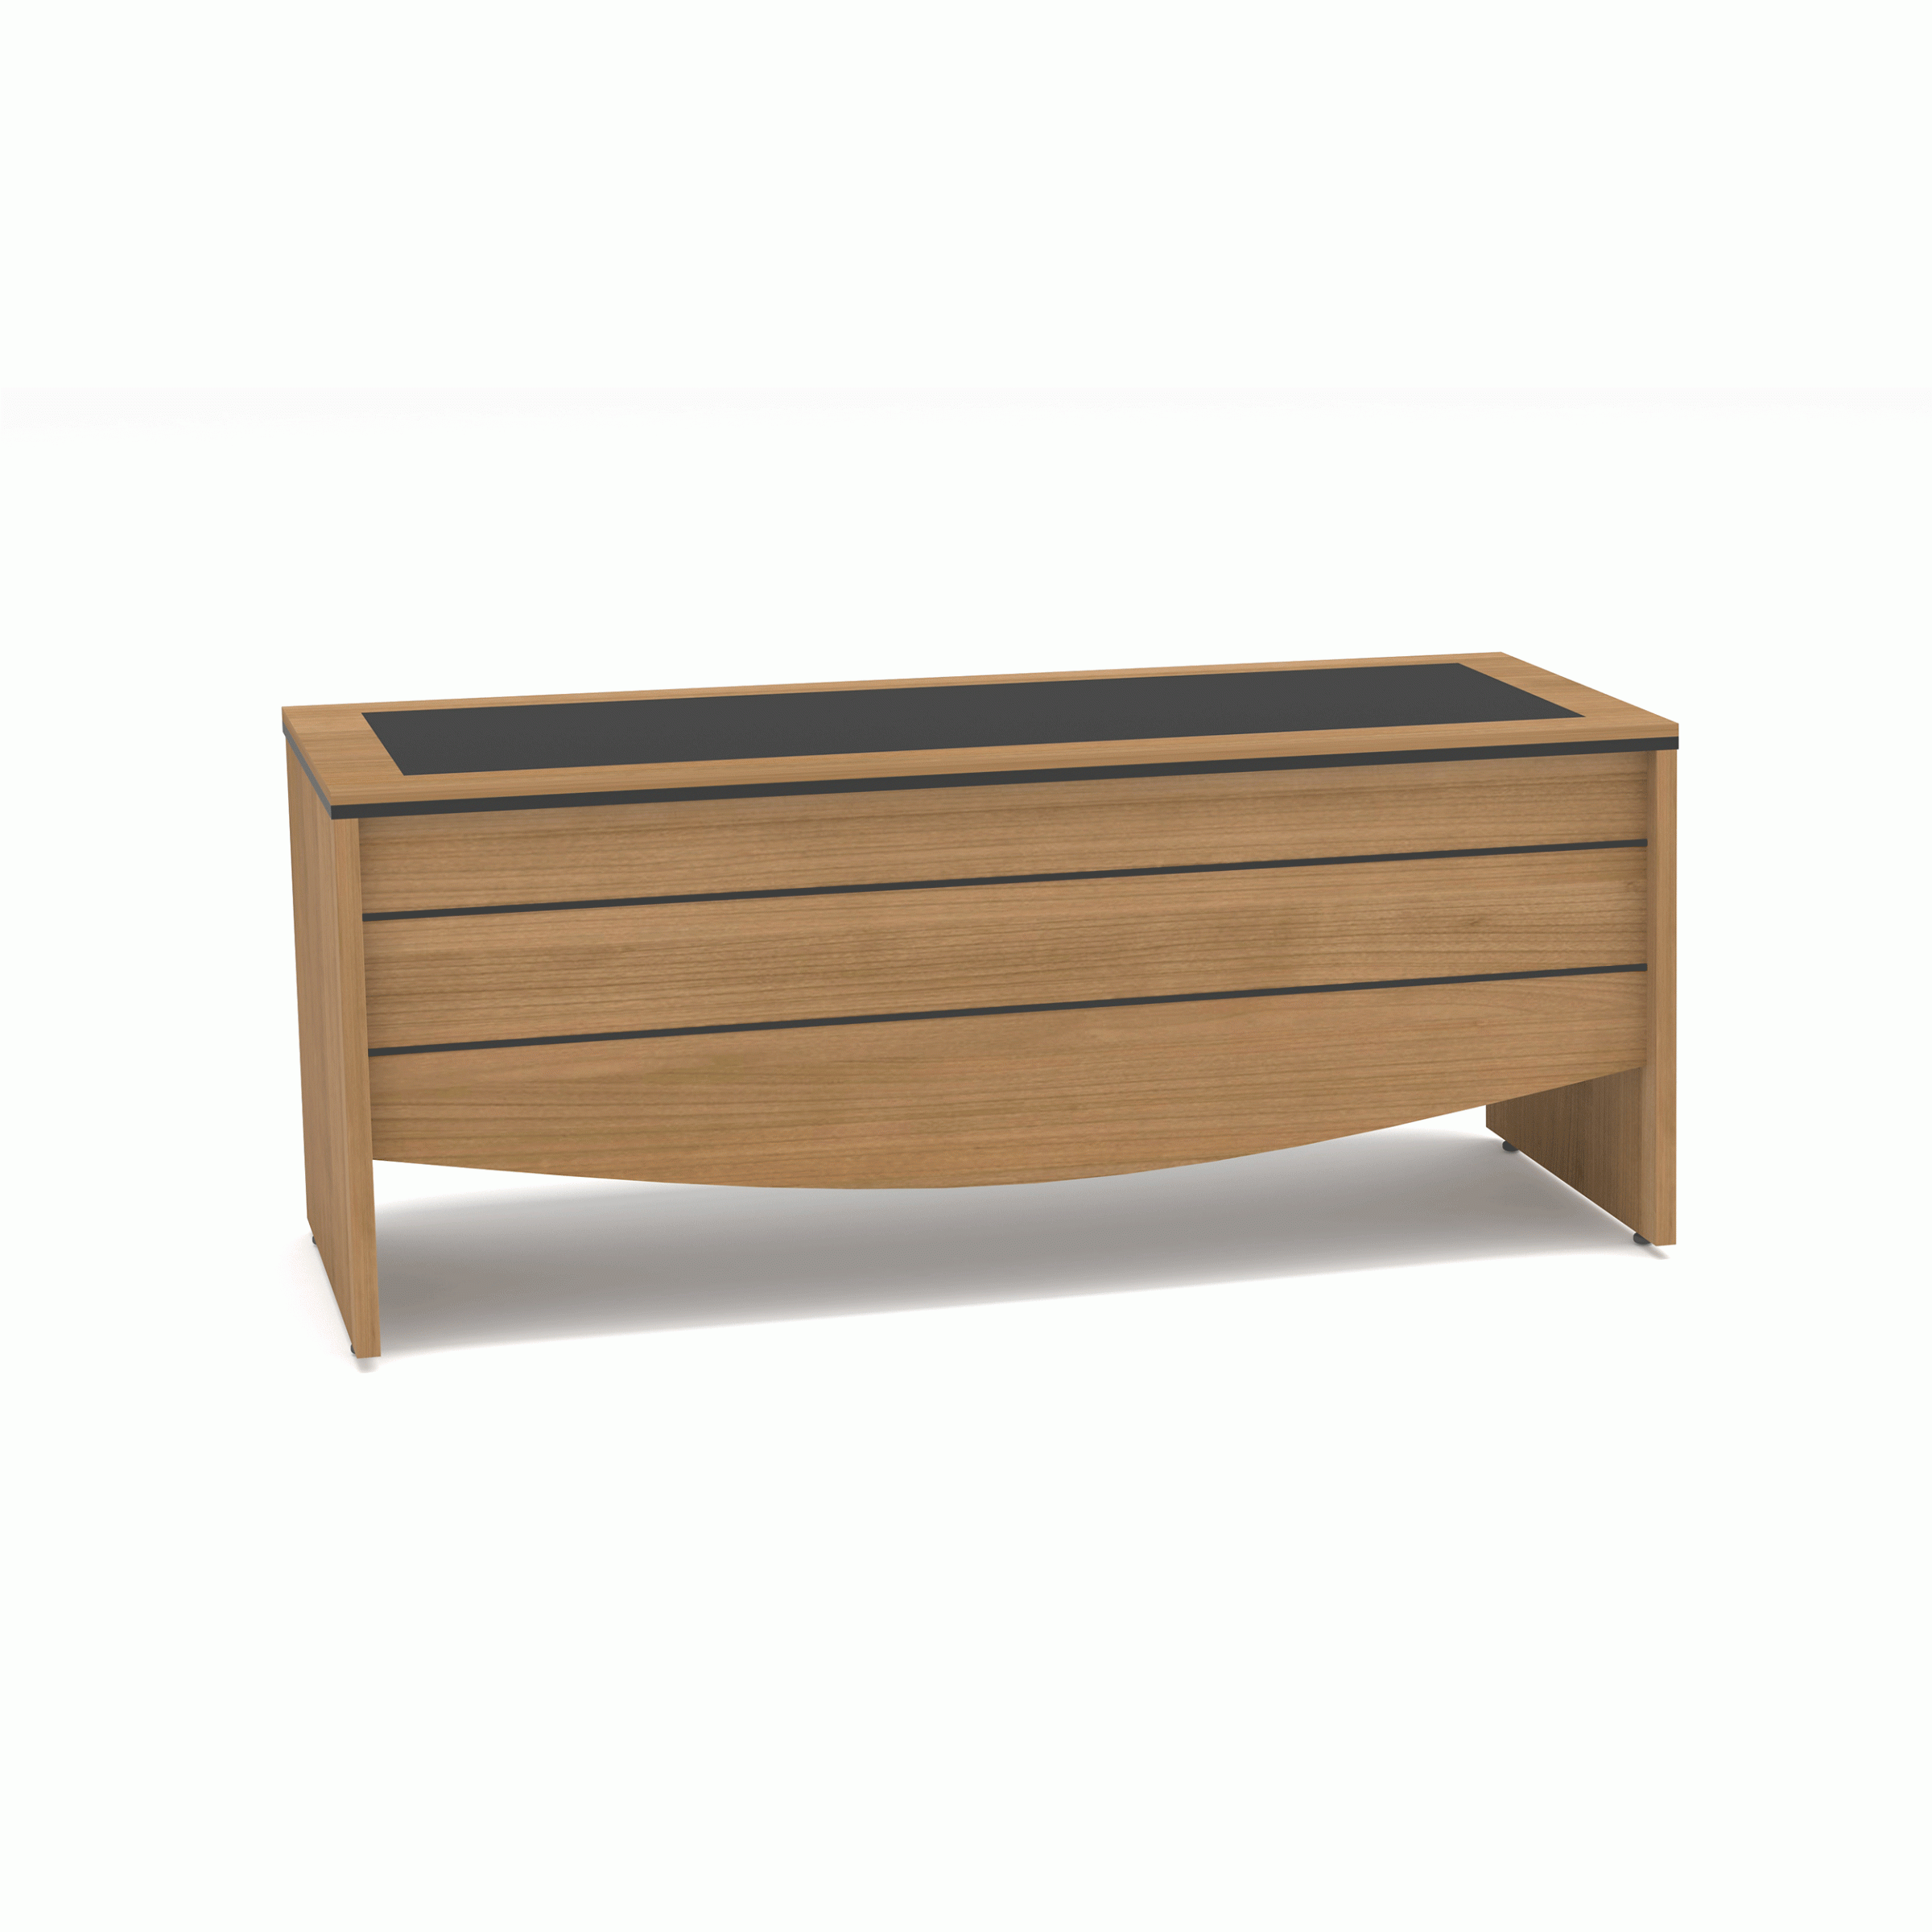 A leather desk with a length of 200 cm and a thickness of 36 mm with available color options